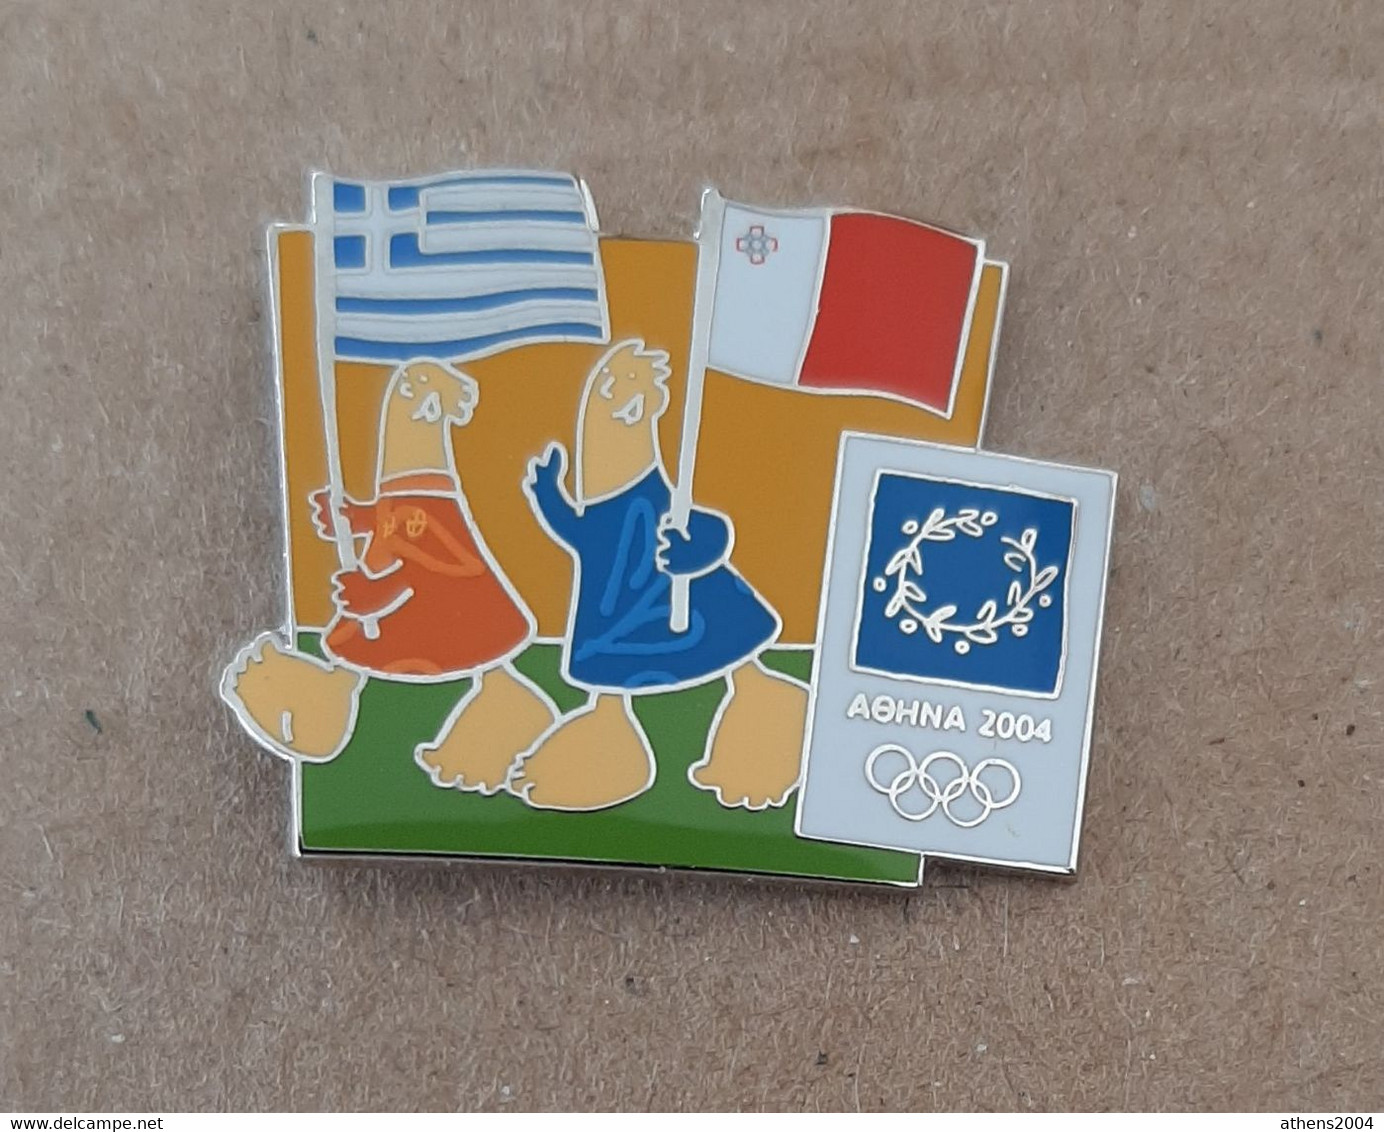 Athens 2004 Olympic Games - Mascots With E.U. Flags, Greece - Malta Flags Pin - Jeux Olympiques